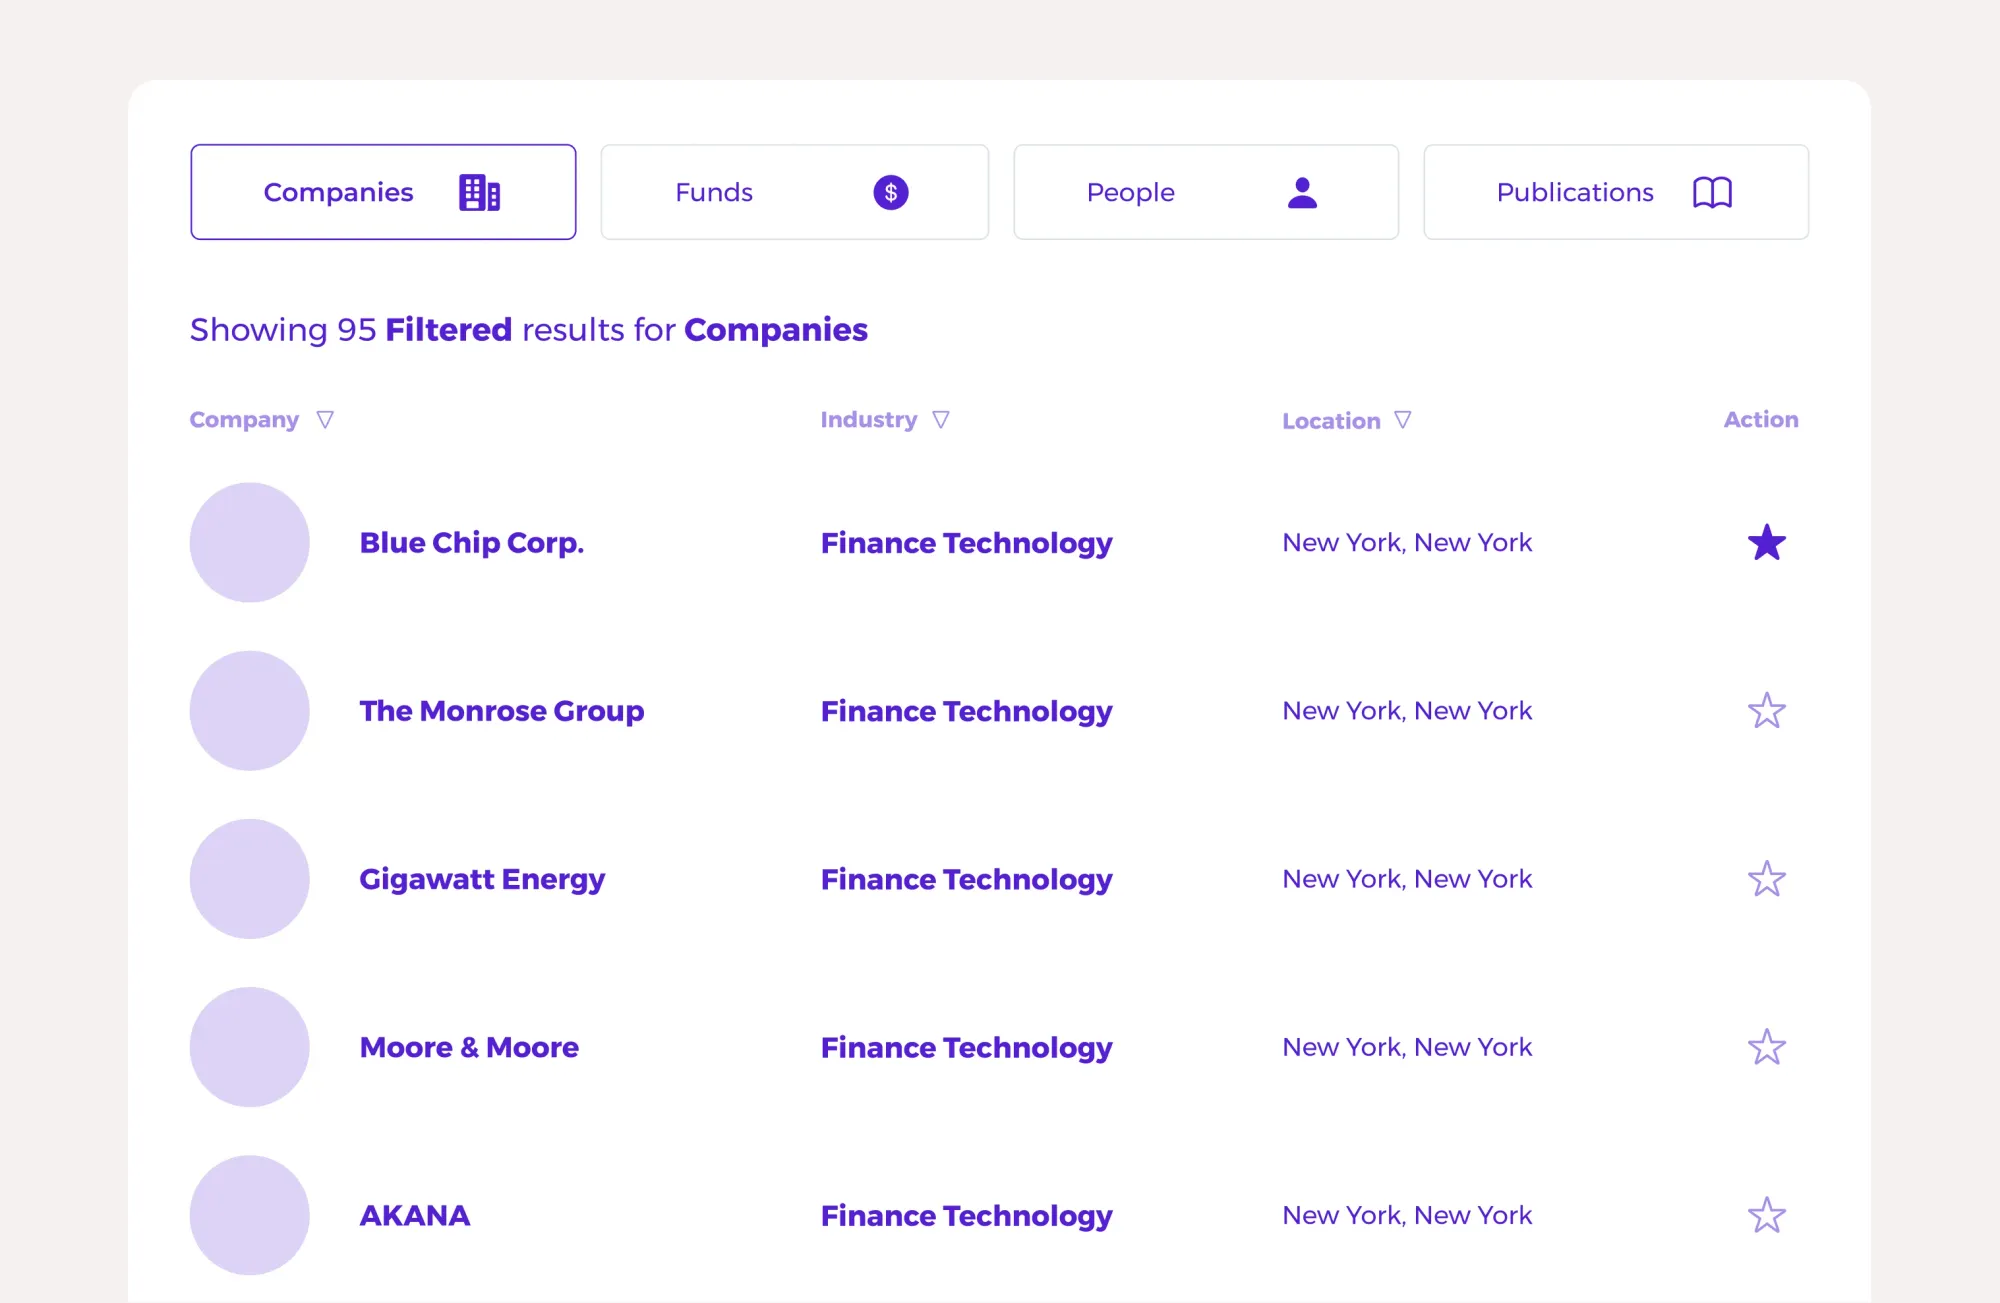 Search results showing 95 companies filtered by Finance Technology in New York. Companies include Blue Chip Corp., The Monrose Group, Gigawatt Energy, Moore & Moore, and AKANA.